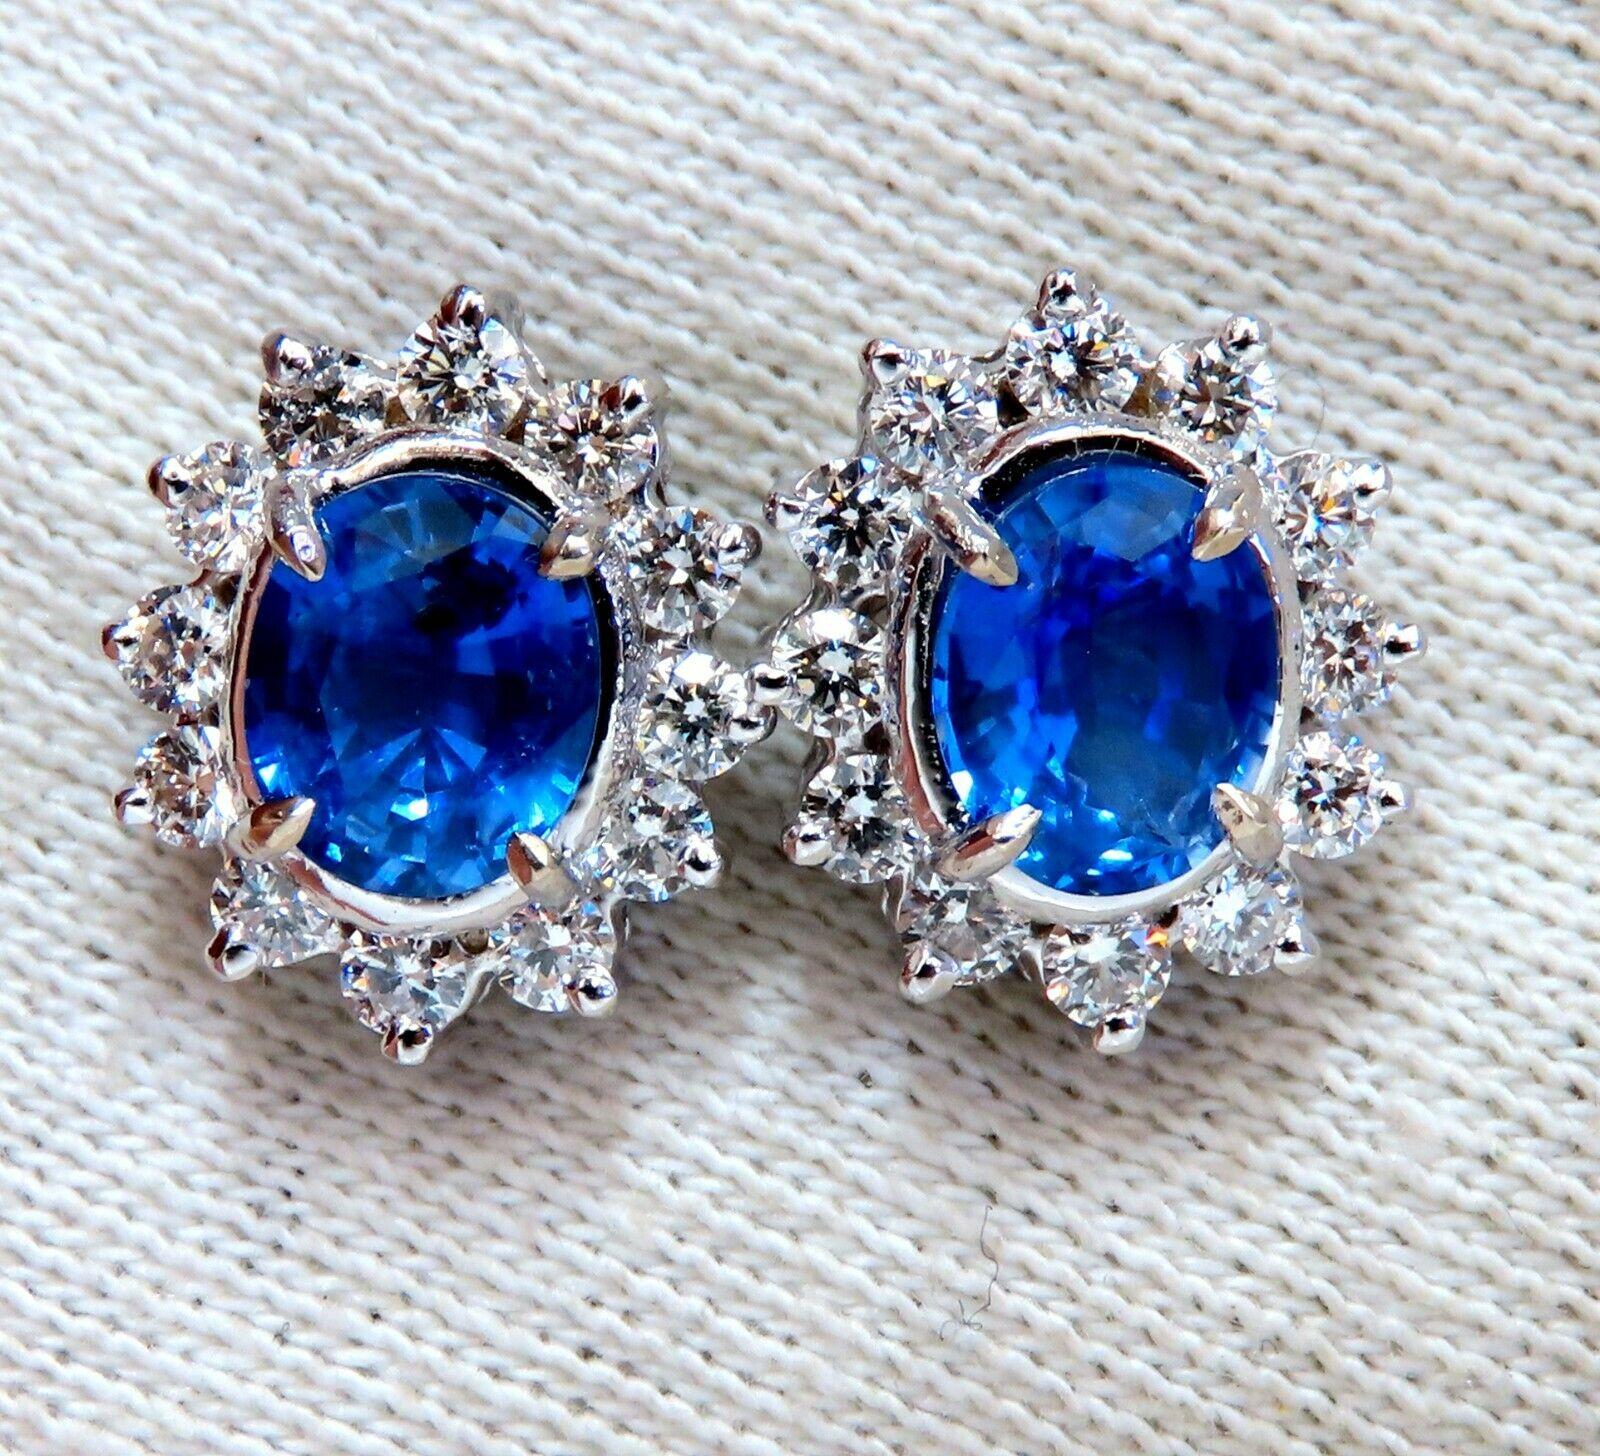 Sapphire Halo Cluster Prime
Natural sapphire & Diamonds classic cocktail Stud earrings

3.05ct total weight sapphires

Ovals, full cut brilliants.

Each sapphire: 7.5 x 6.5mm

Clean clarity & transparent.

Royal Blue Colors

1.14ct. Round Brilliant